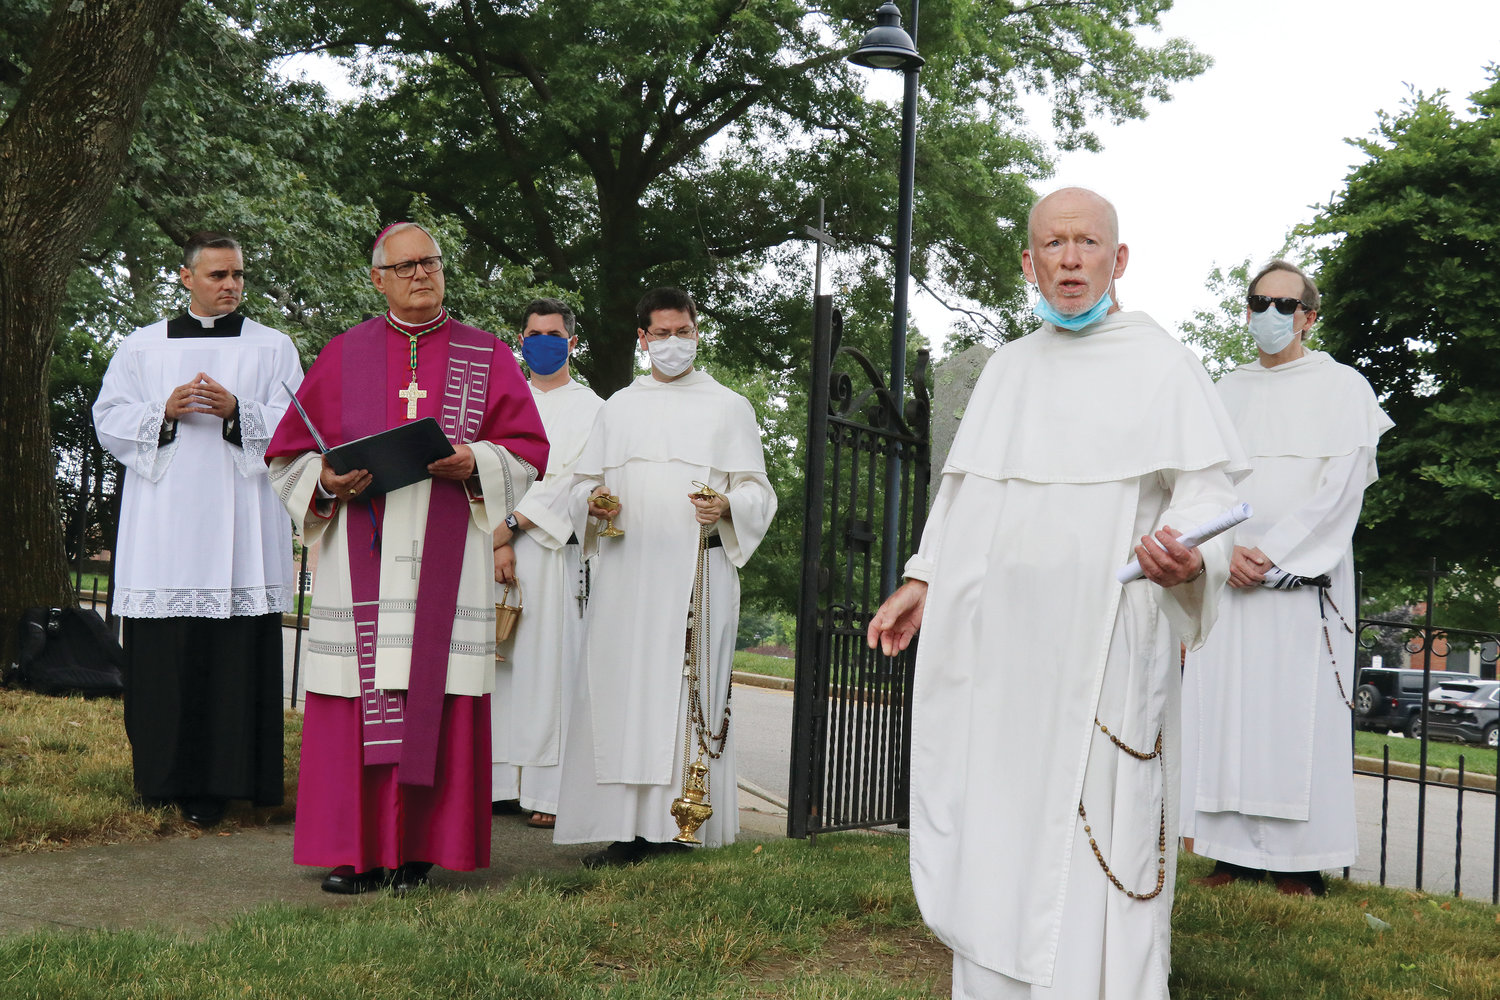 As Bishop Tobin looks on, Father Brian Shanley, O.P., president of Providence College, asks for prayers for the man who vandalized the Dominican Cemetery before attacking and injuring a campus police officer on June 22.